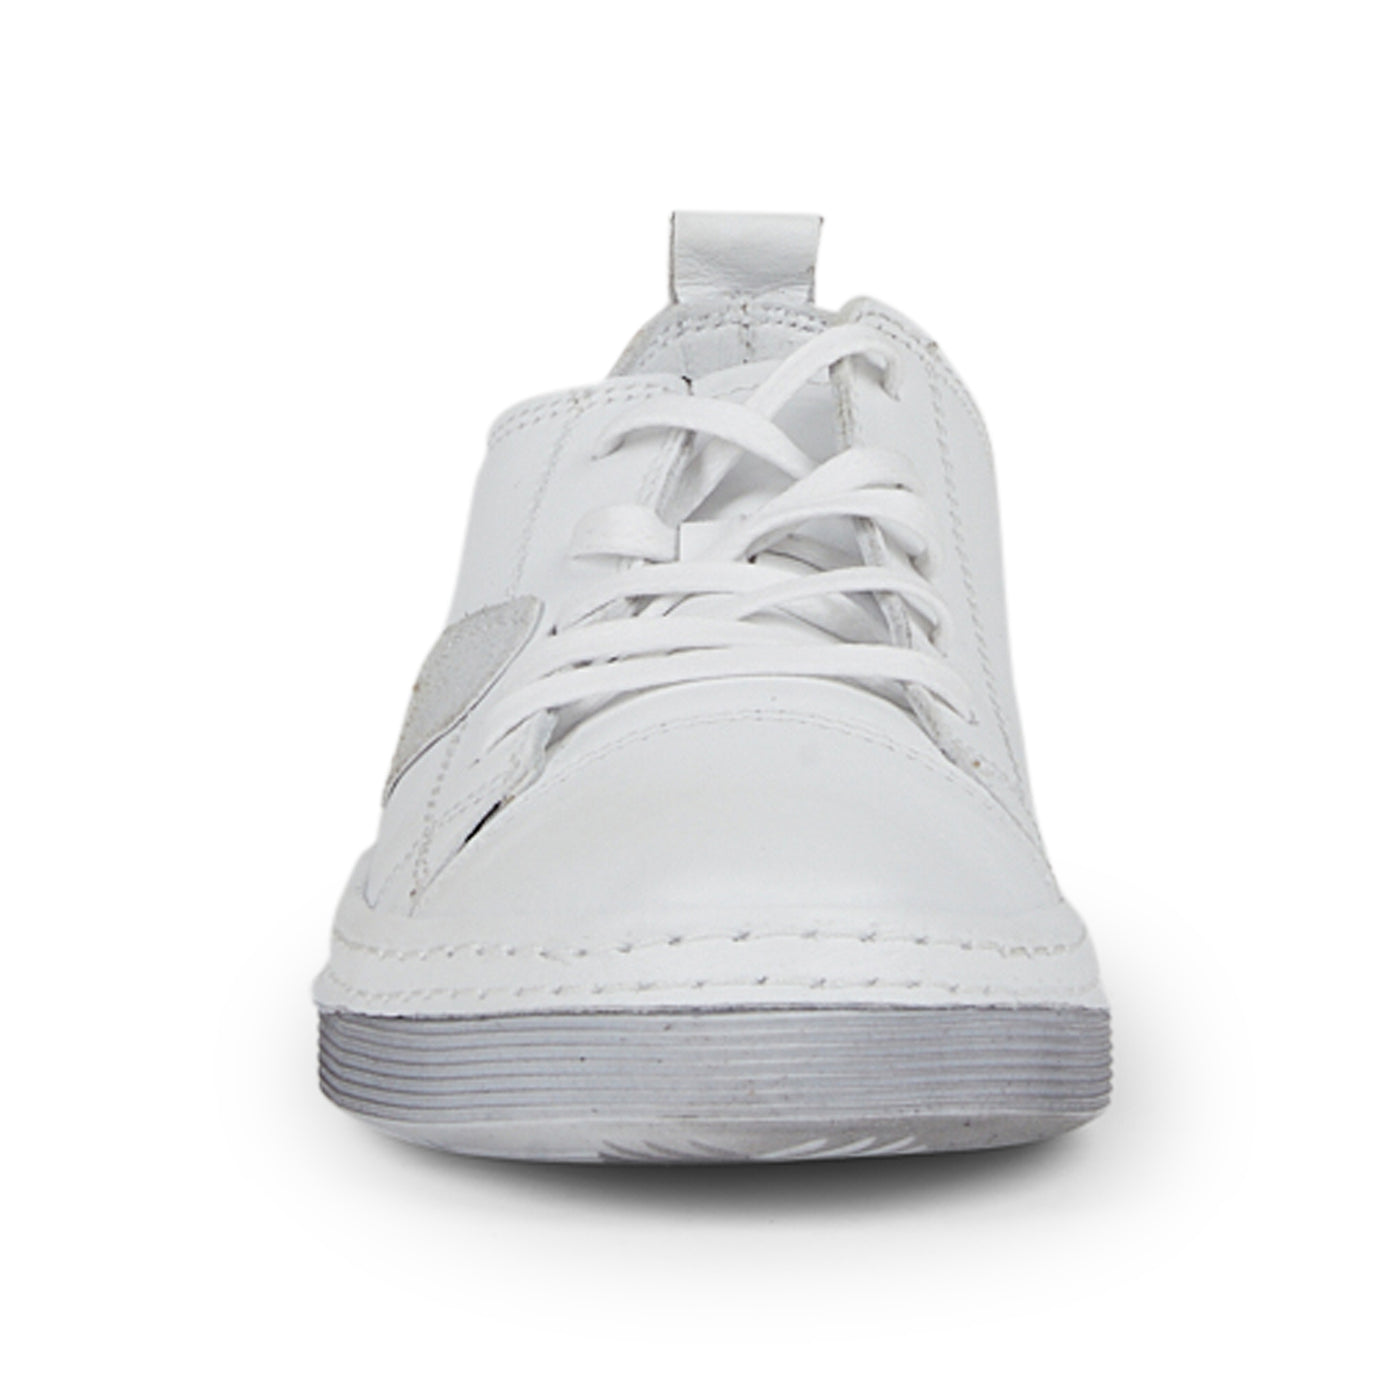 Buy quality Zilla - White Laces from Planet shoes